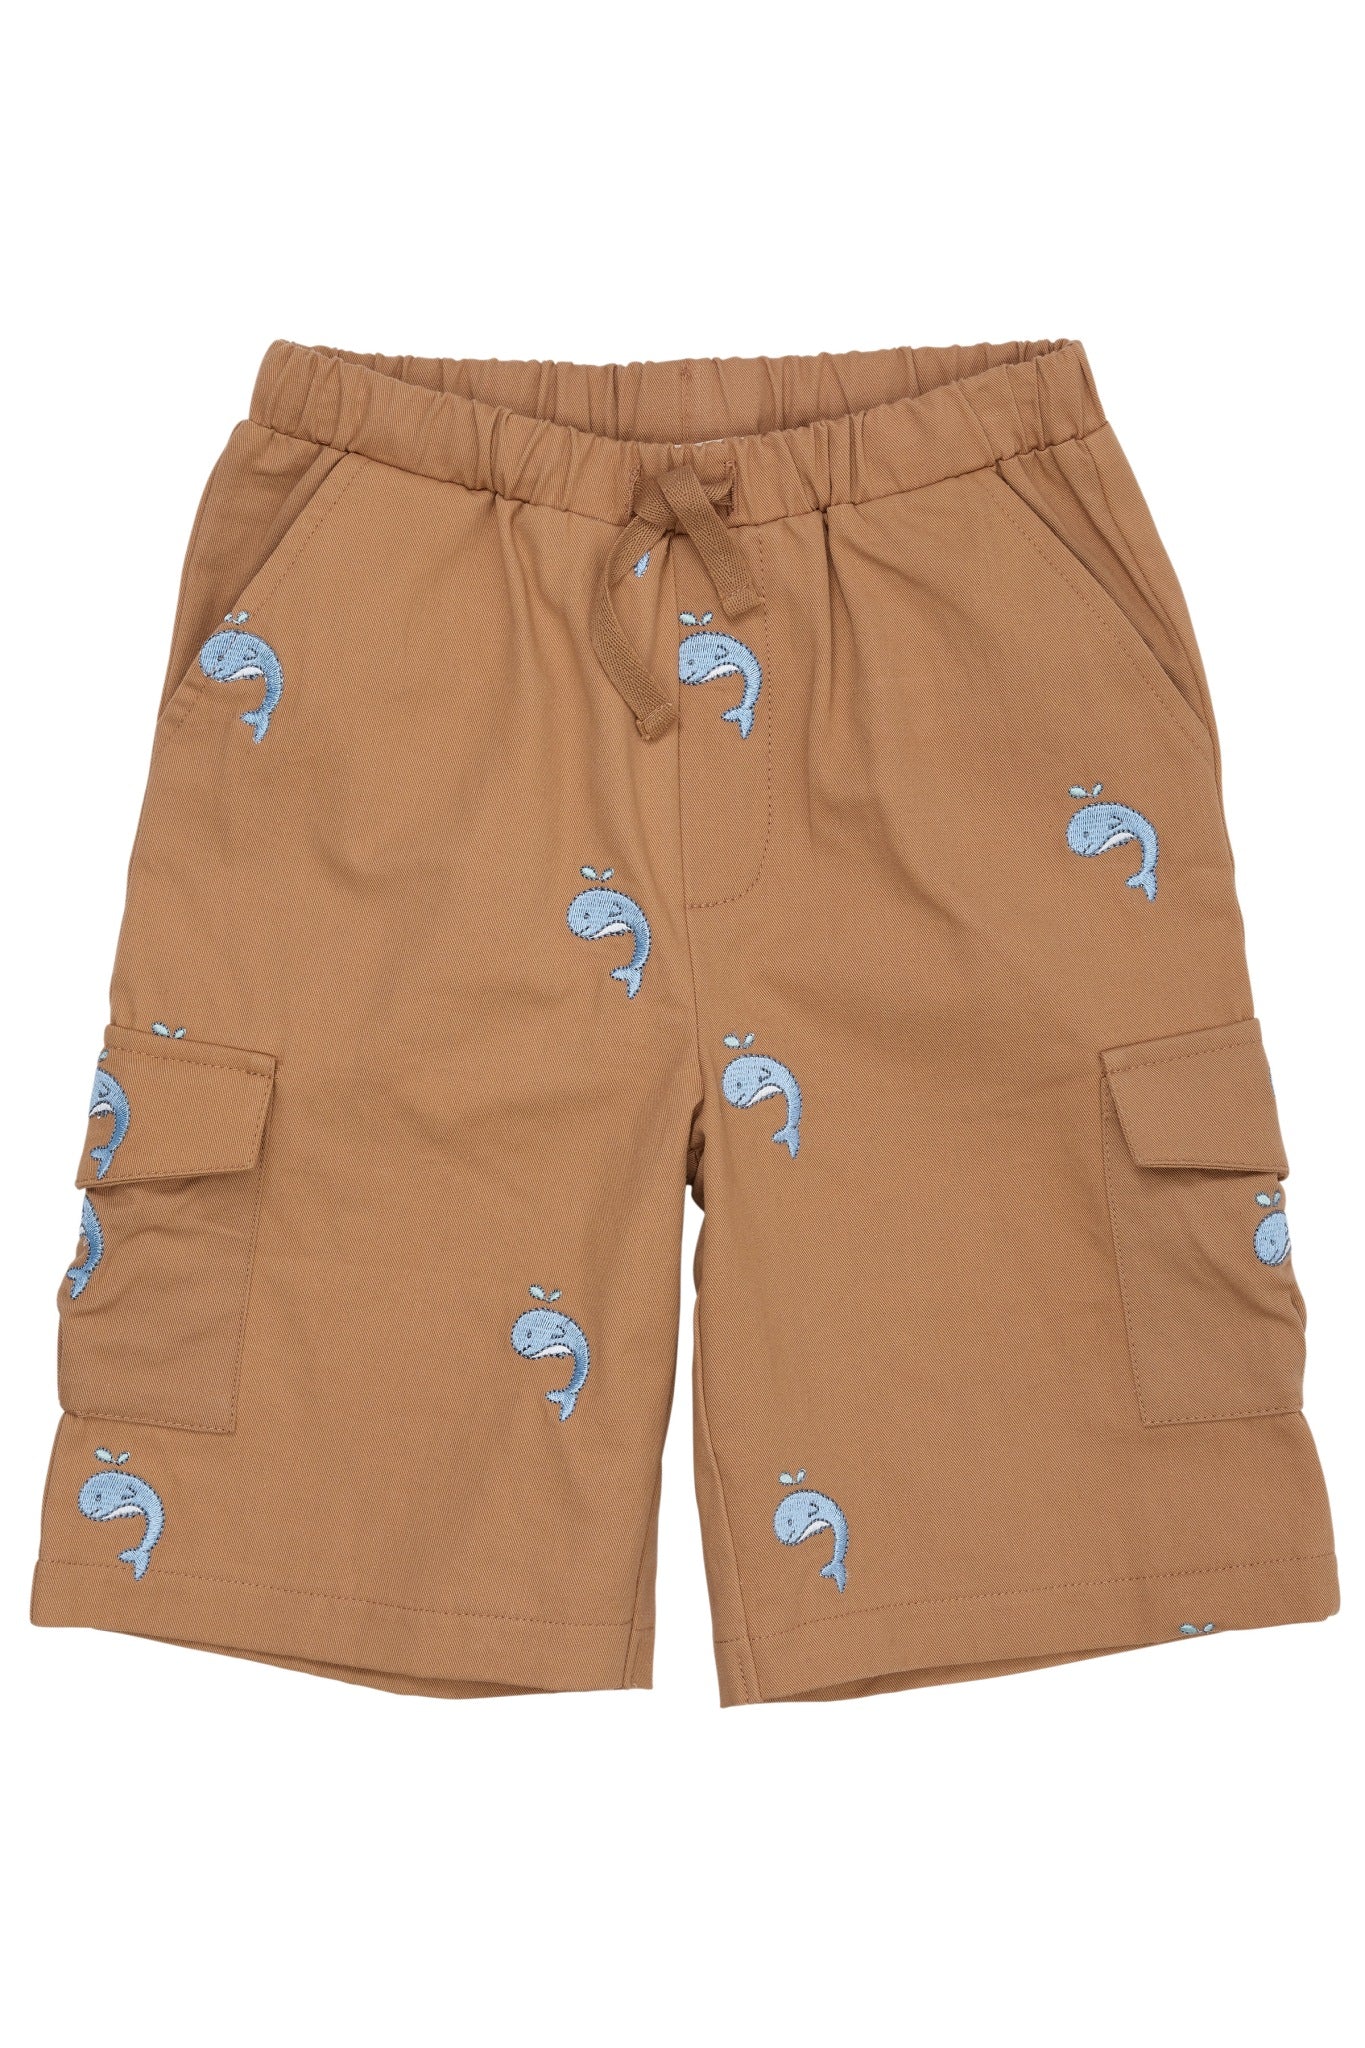 TWILL SHORTS W. EMBROIDERY - BEIGE